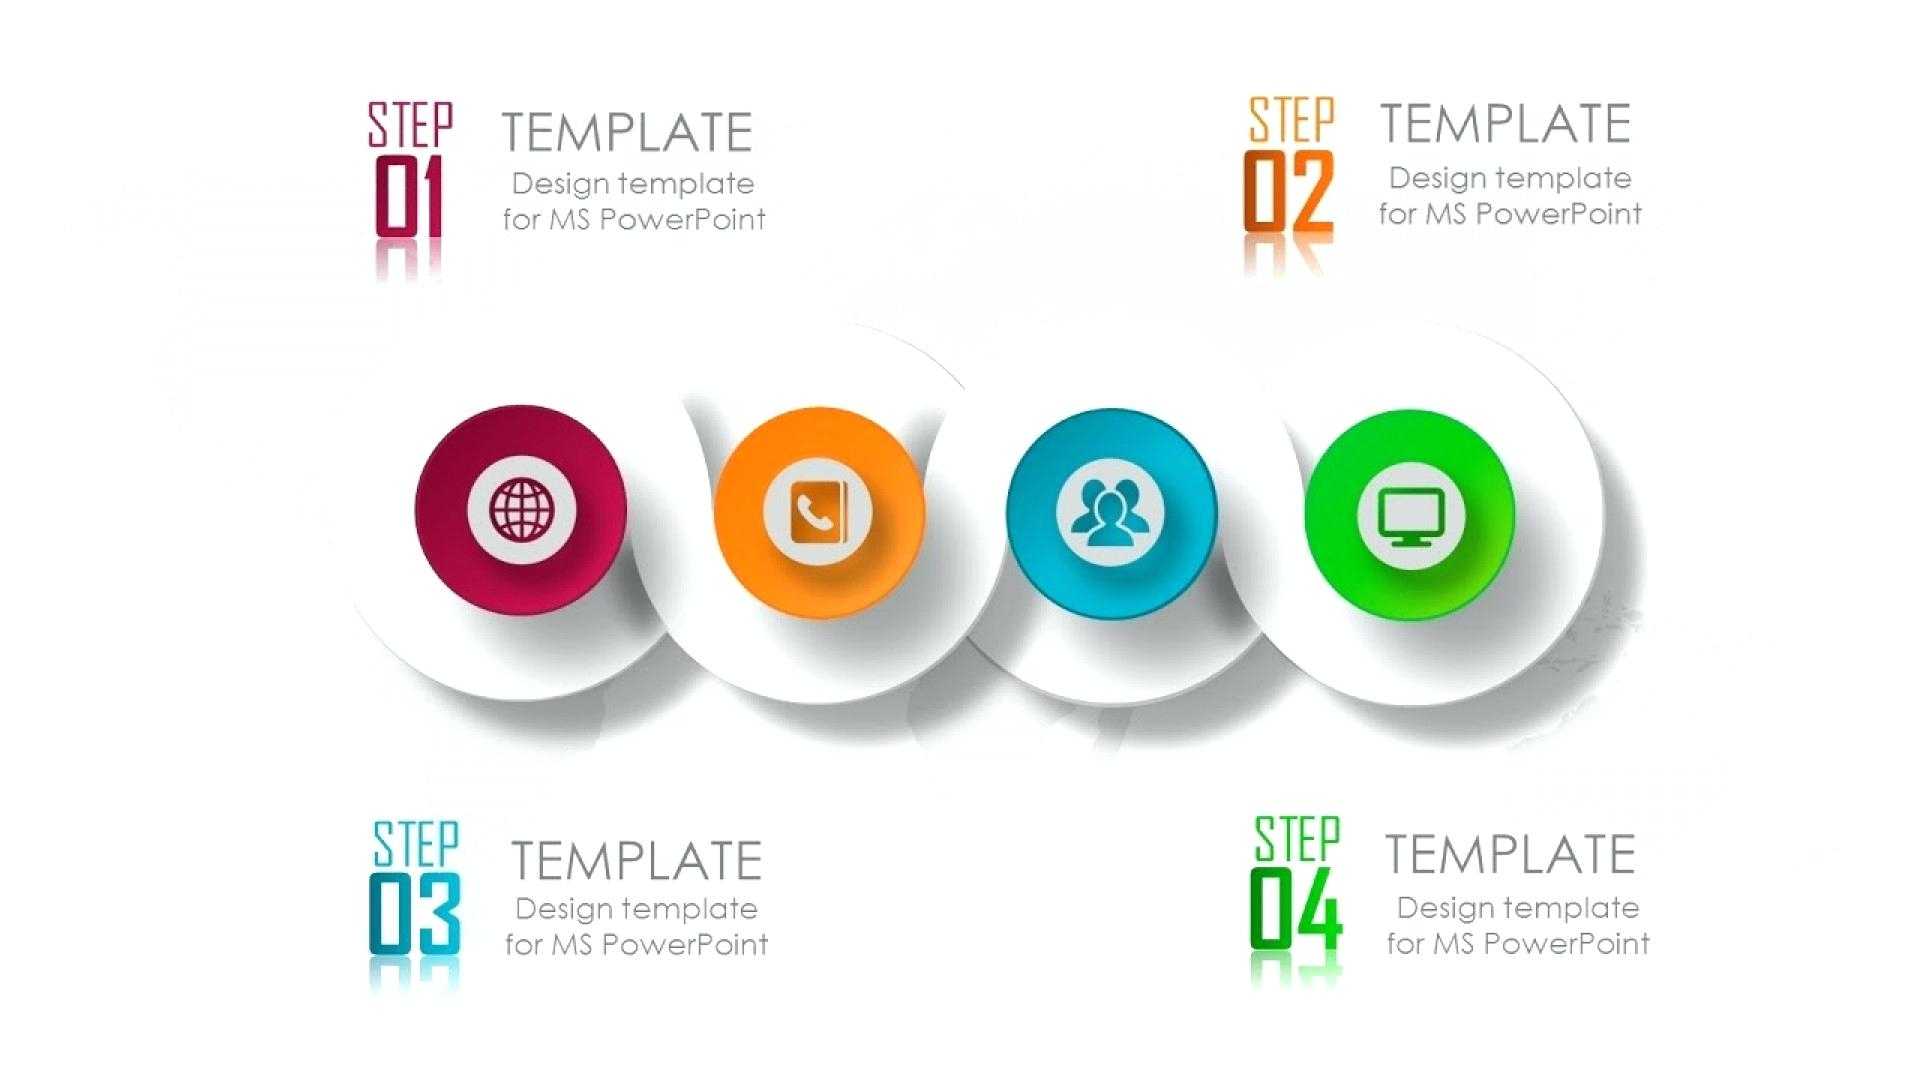 Ppt Free Download Template – Vmarques Regarding Powerpoint Animation Templates Free Download